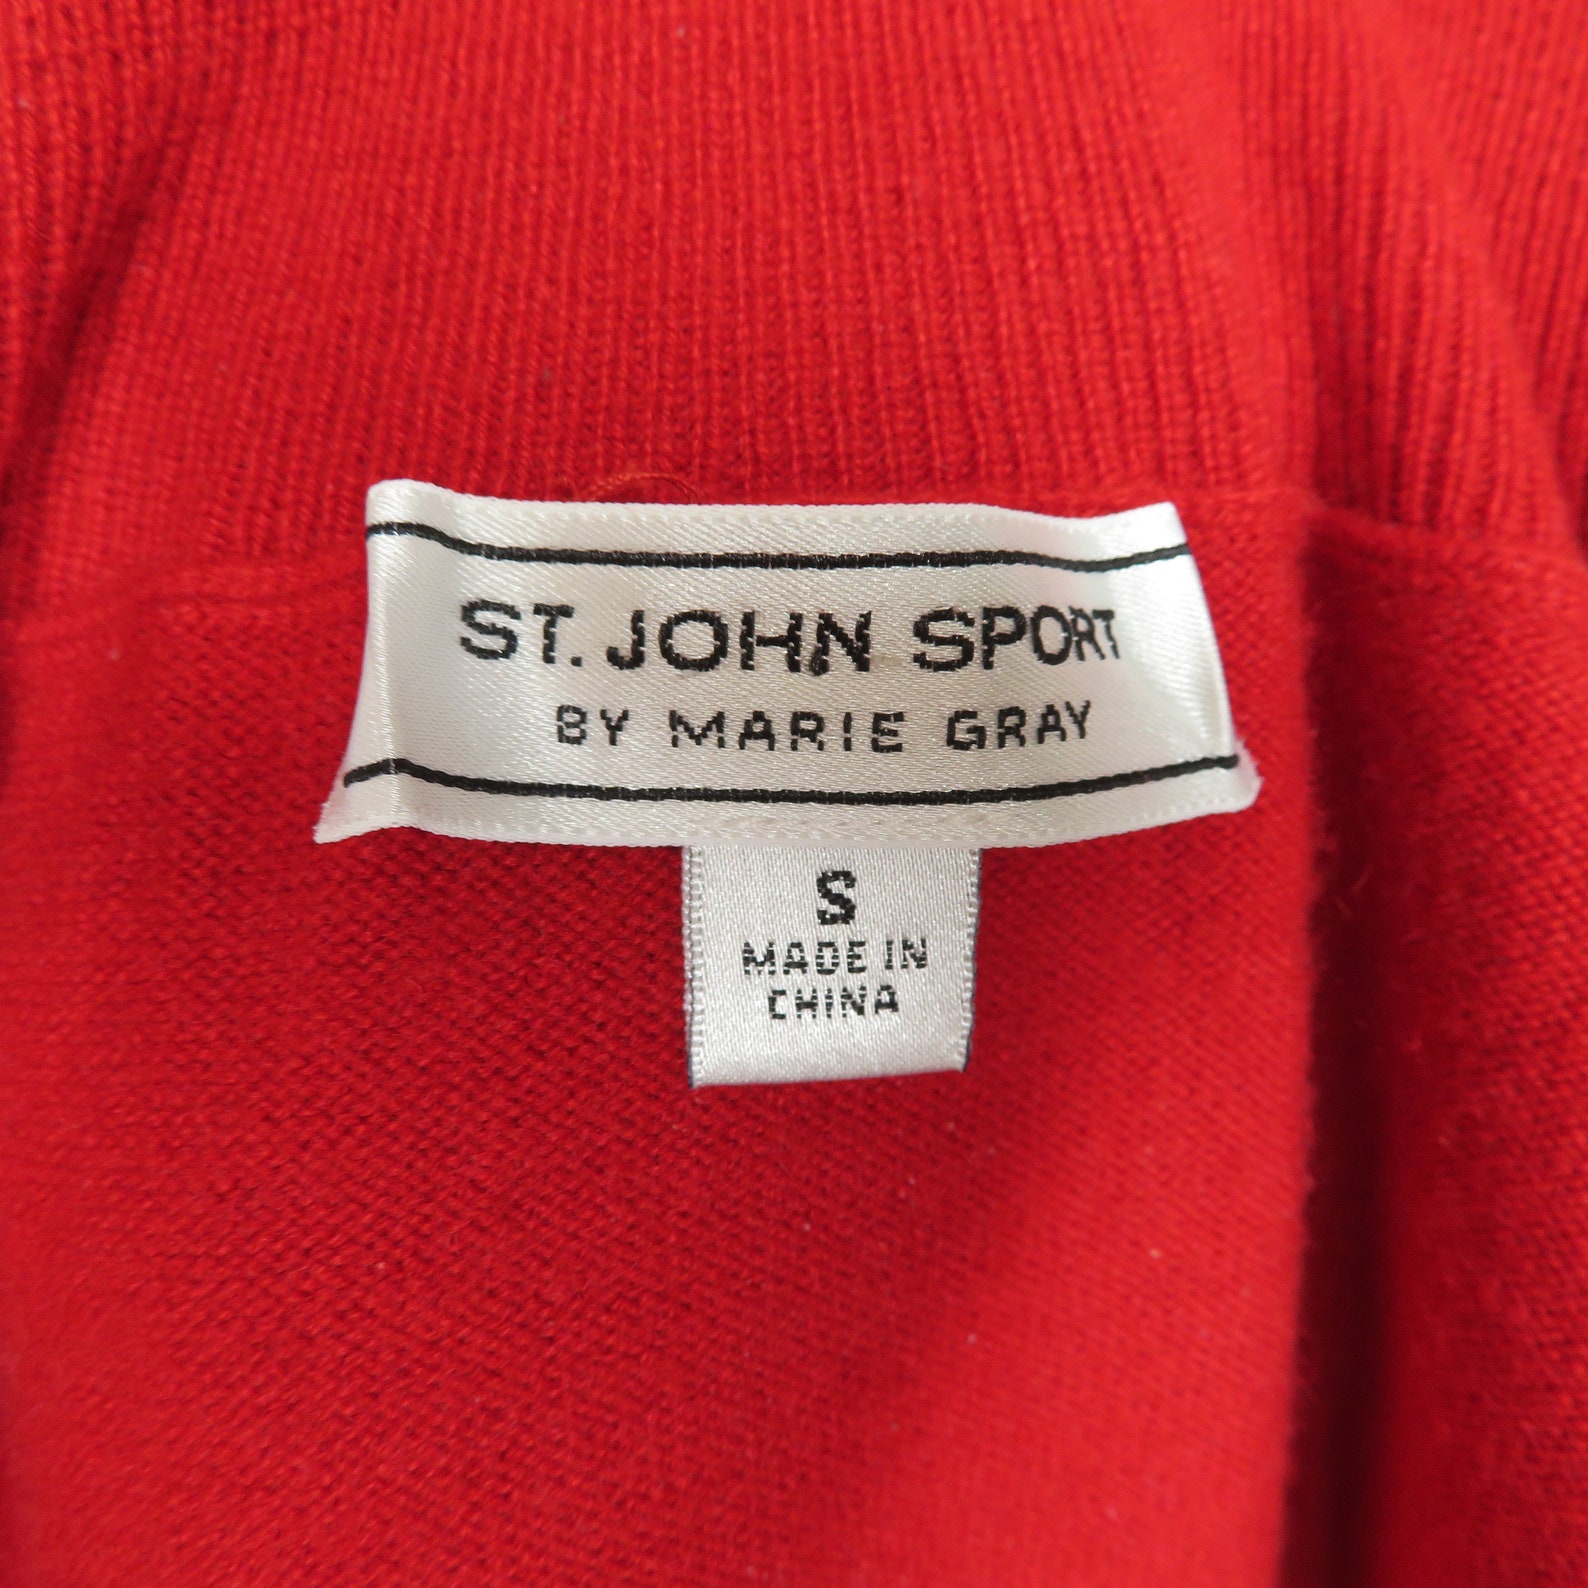 Vintage St John Sport by Marie Gray 100% Cashmere Red | Etsy